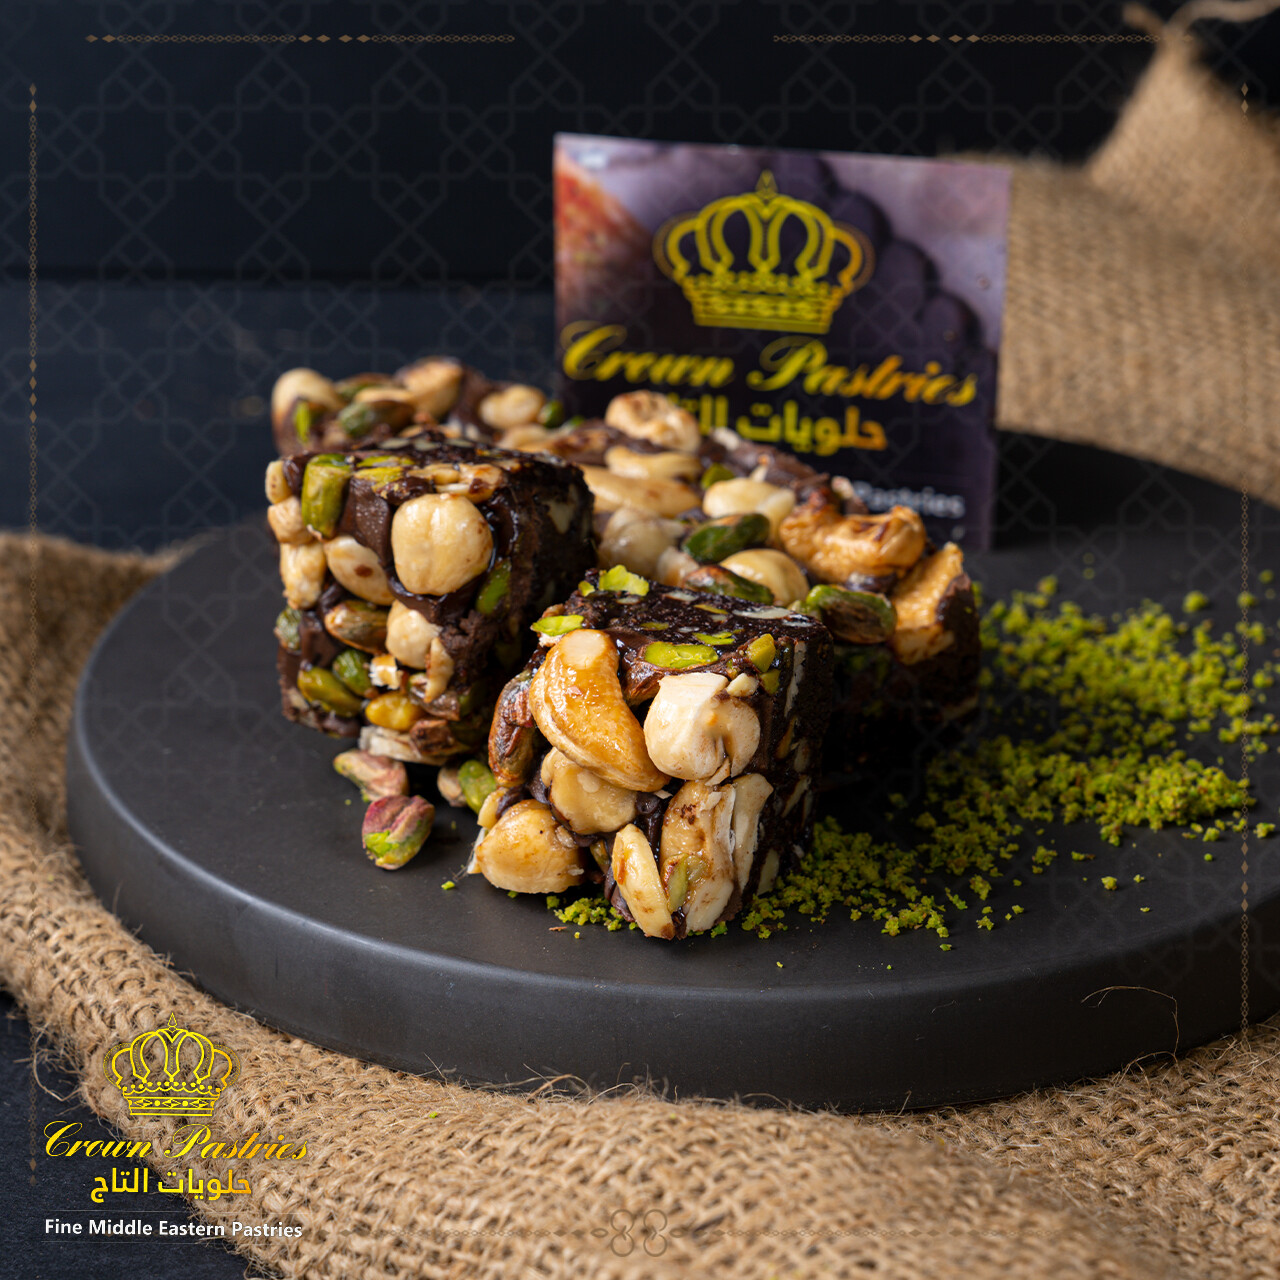 Chocolate mafrookeh with Mixed nuts